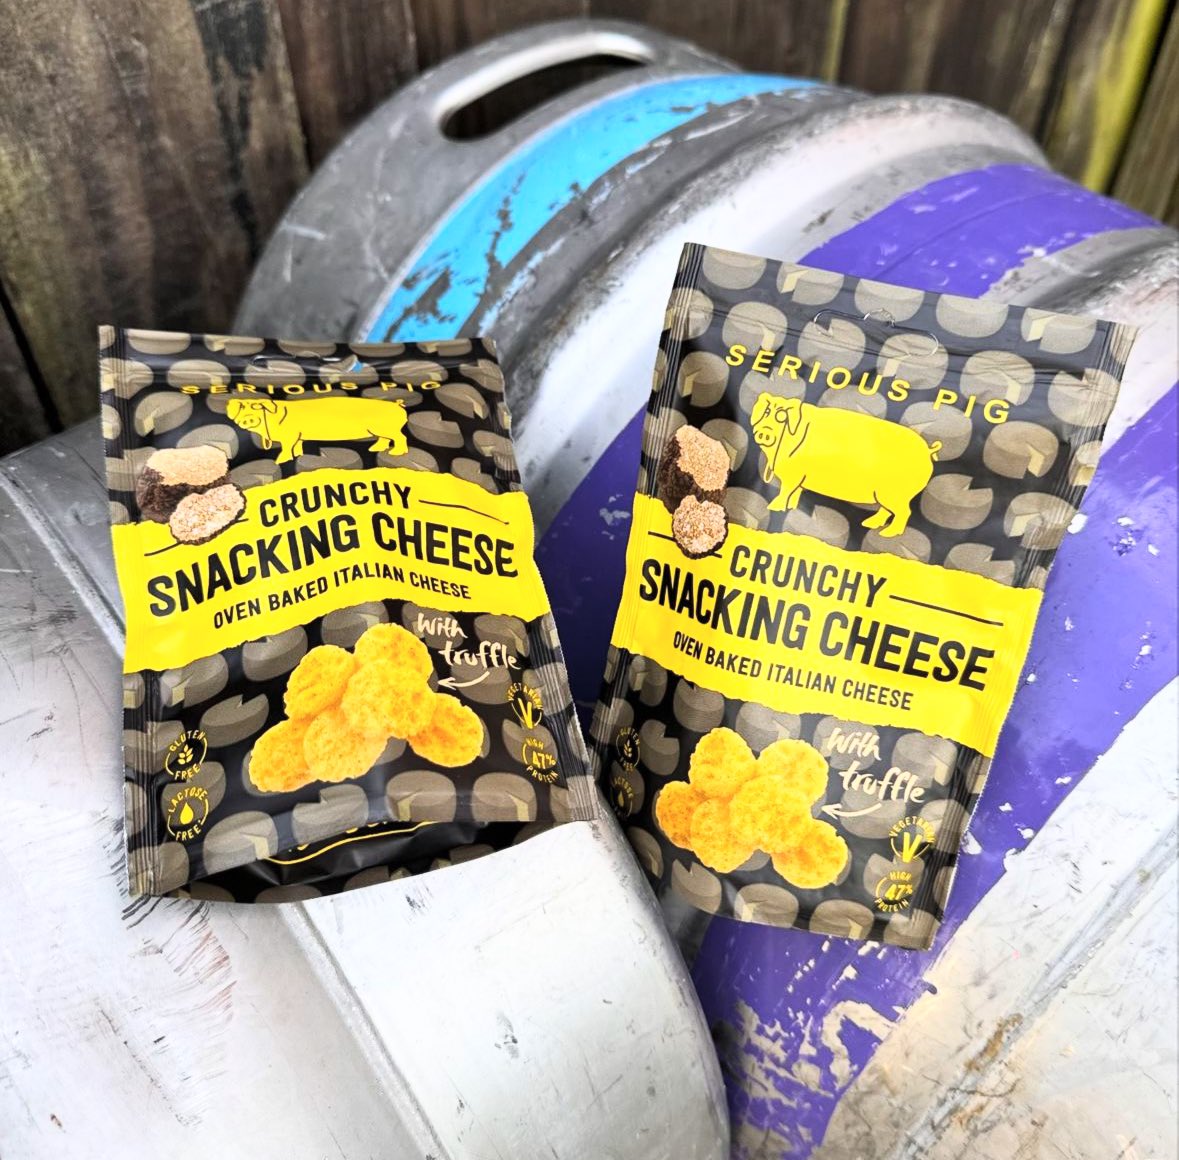 BACK at The Magnet 🧲 

From @SeriousPig we have Crunchy Snacking Truffle Cheese 🧀 

#magnetcolchester
#colchesterbusiness 
#colchesterpub
#colchester
#essexpub
#seriouspigofficial 
#snackingcheese 
#barsnacks 
#micropub